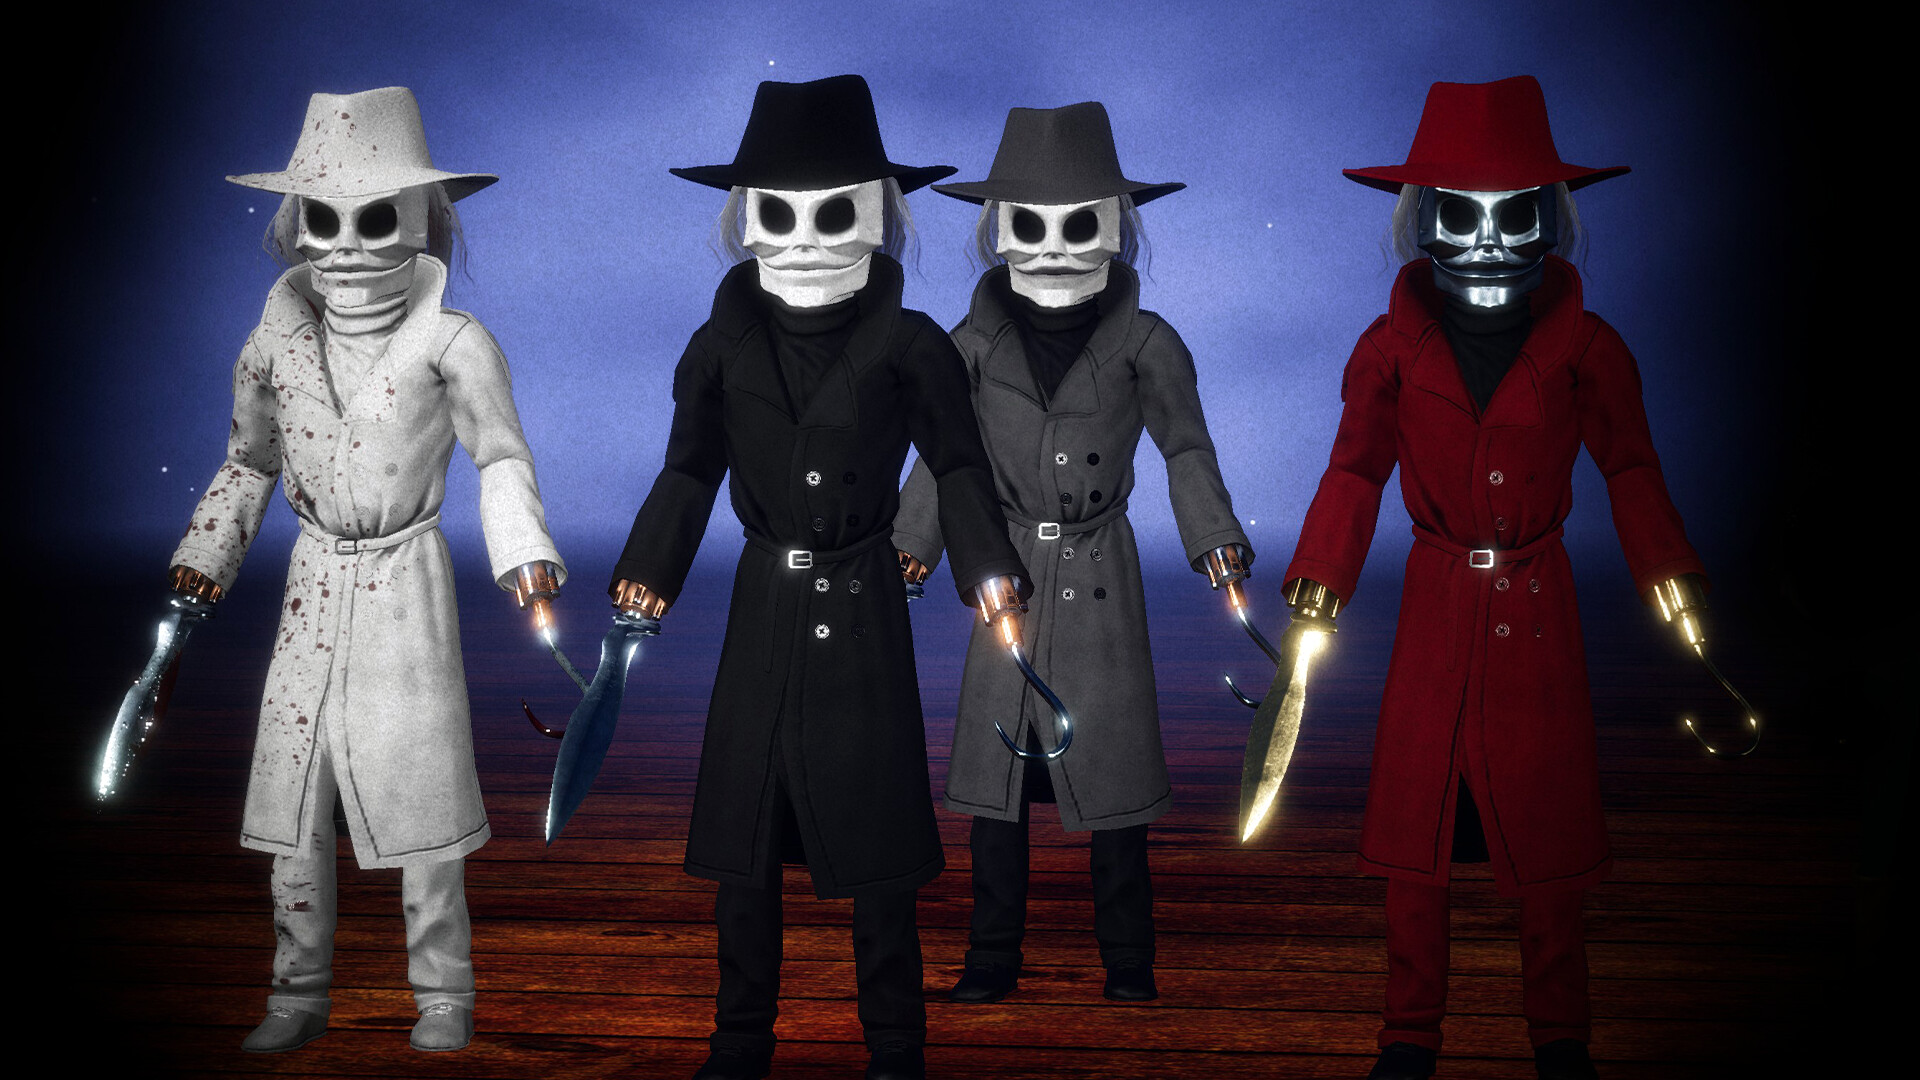 Puppet Master: The Game - Full Moon Toys  - Blade & Sixshooter Skins Featured Screenshot #1